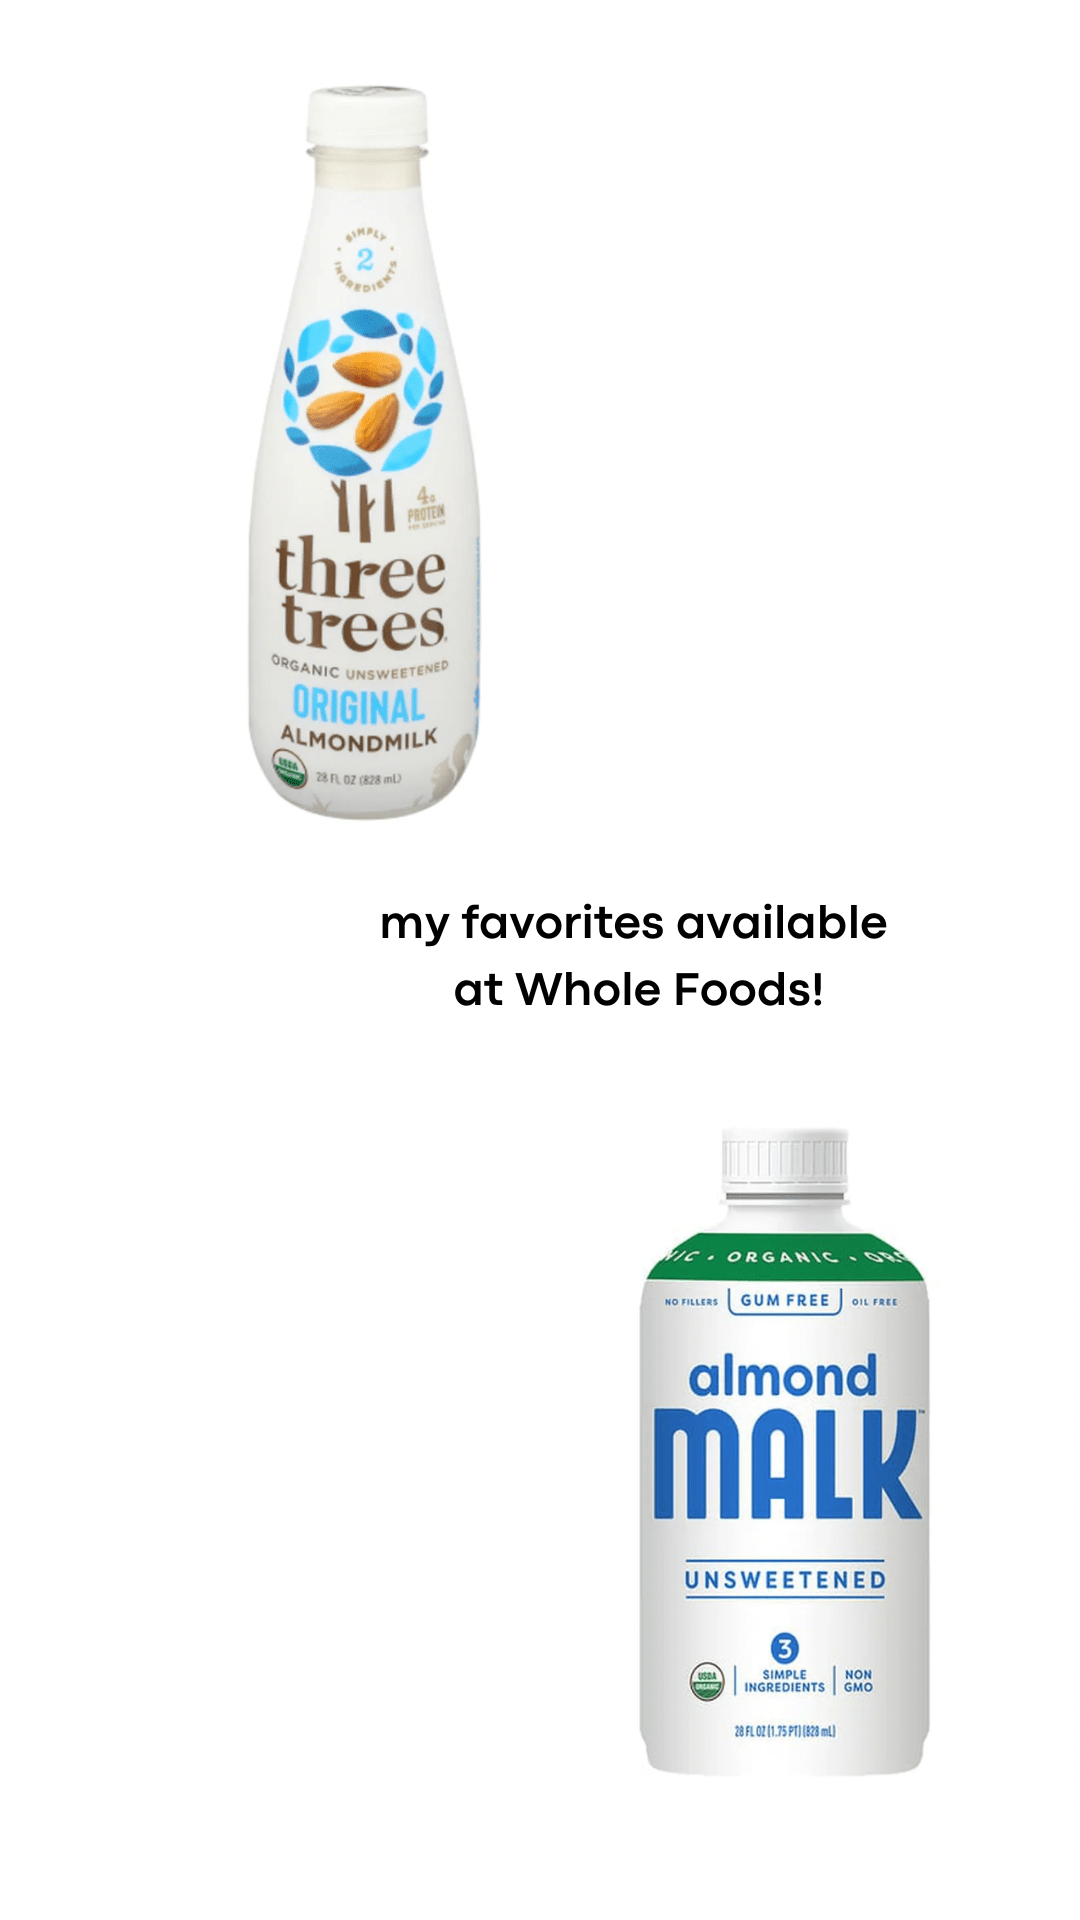 two brands of almond milk, one by three trees pictured top left, and one by malk, pictured bottom right. Black text in center reads "my favorites, available at Whole Foods!"